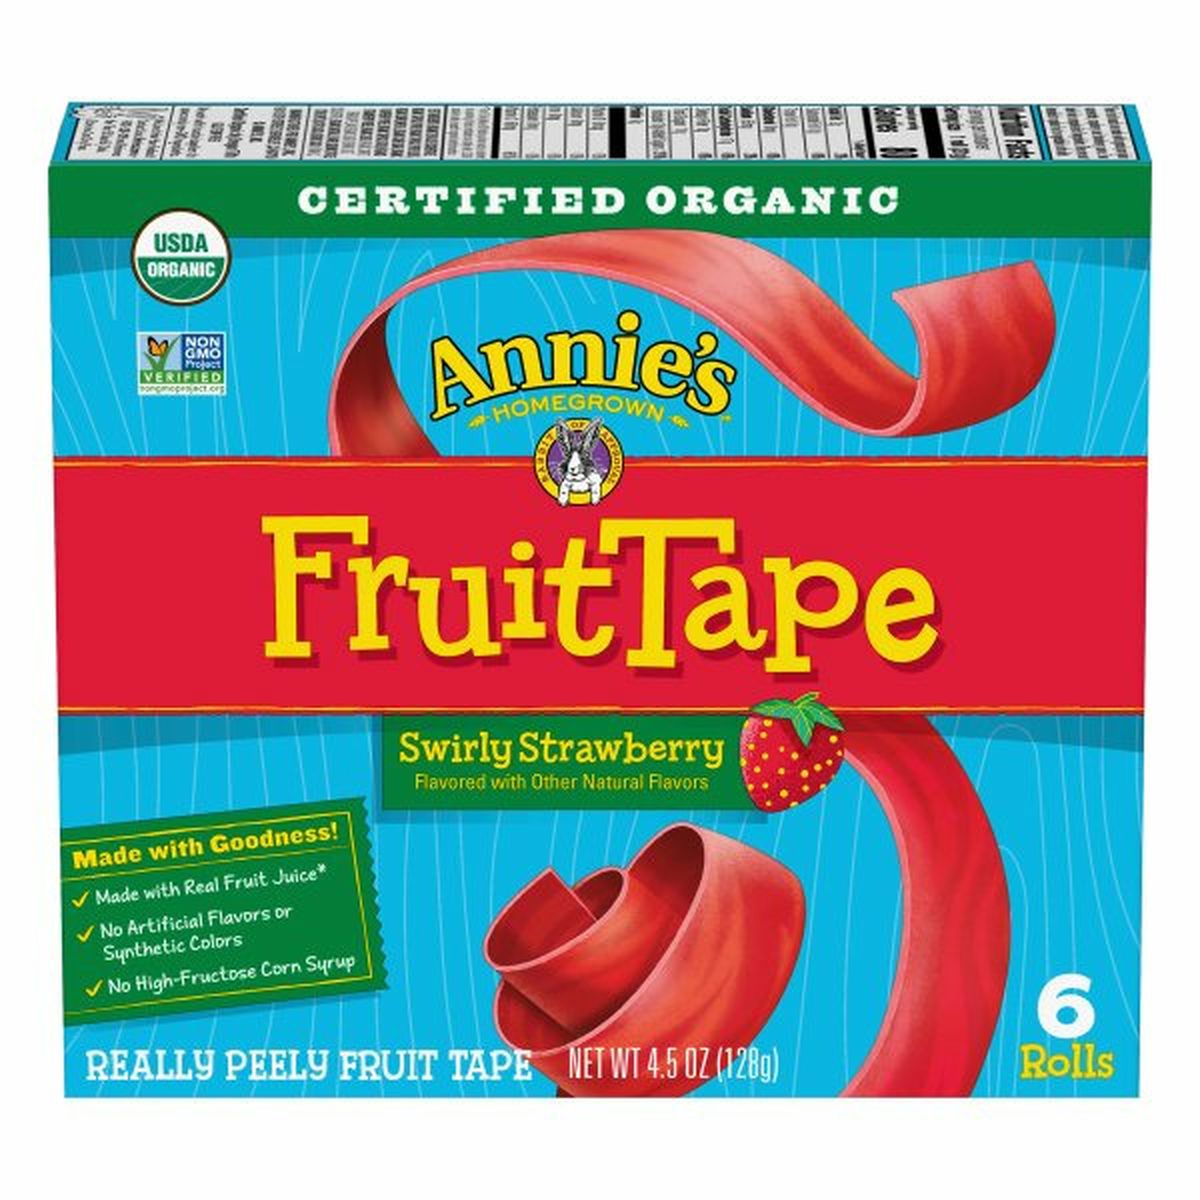 Calories in Annie's Fruit Tape, Swirly Strawberry